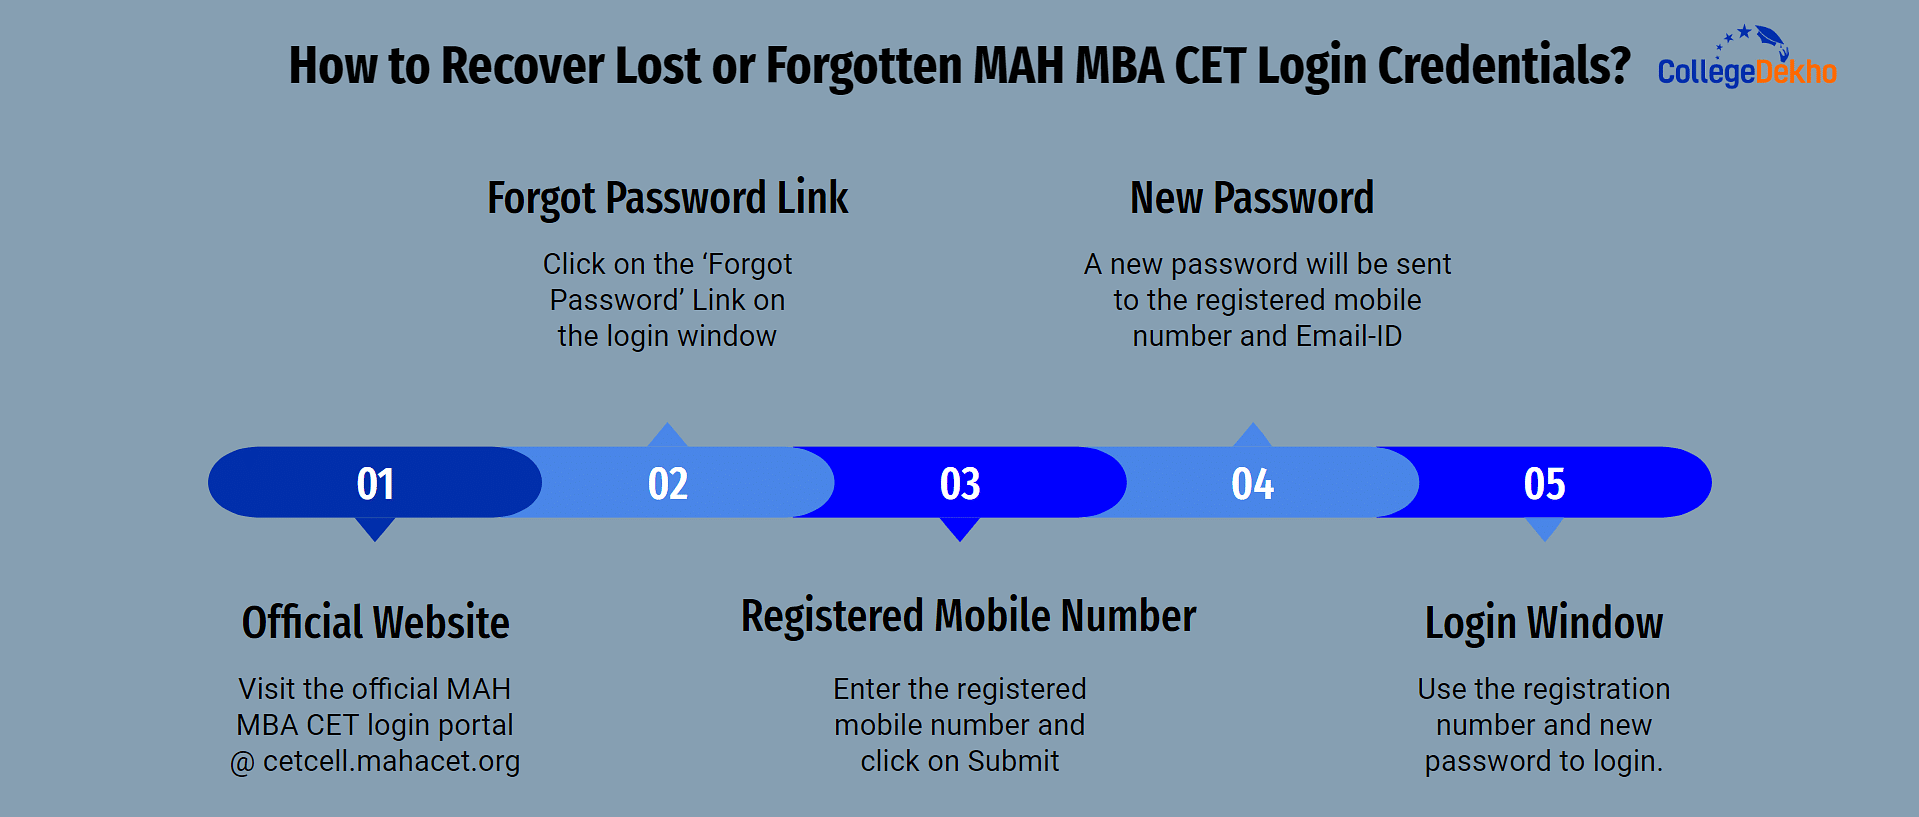 How to Recover Lost or Forgotten MAH MBA CET Login Credentials